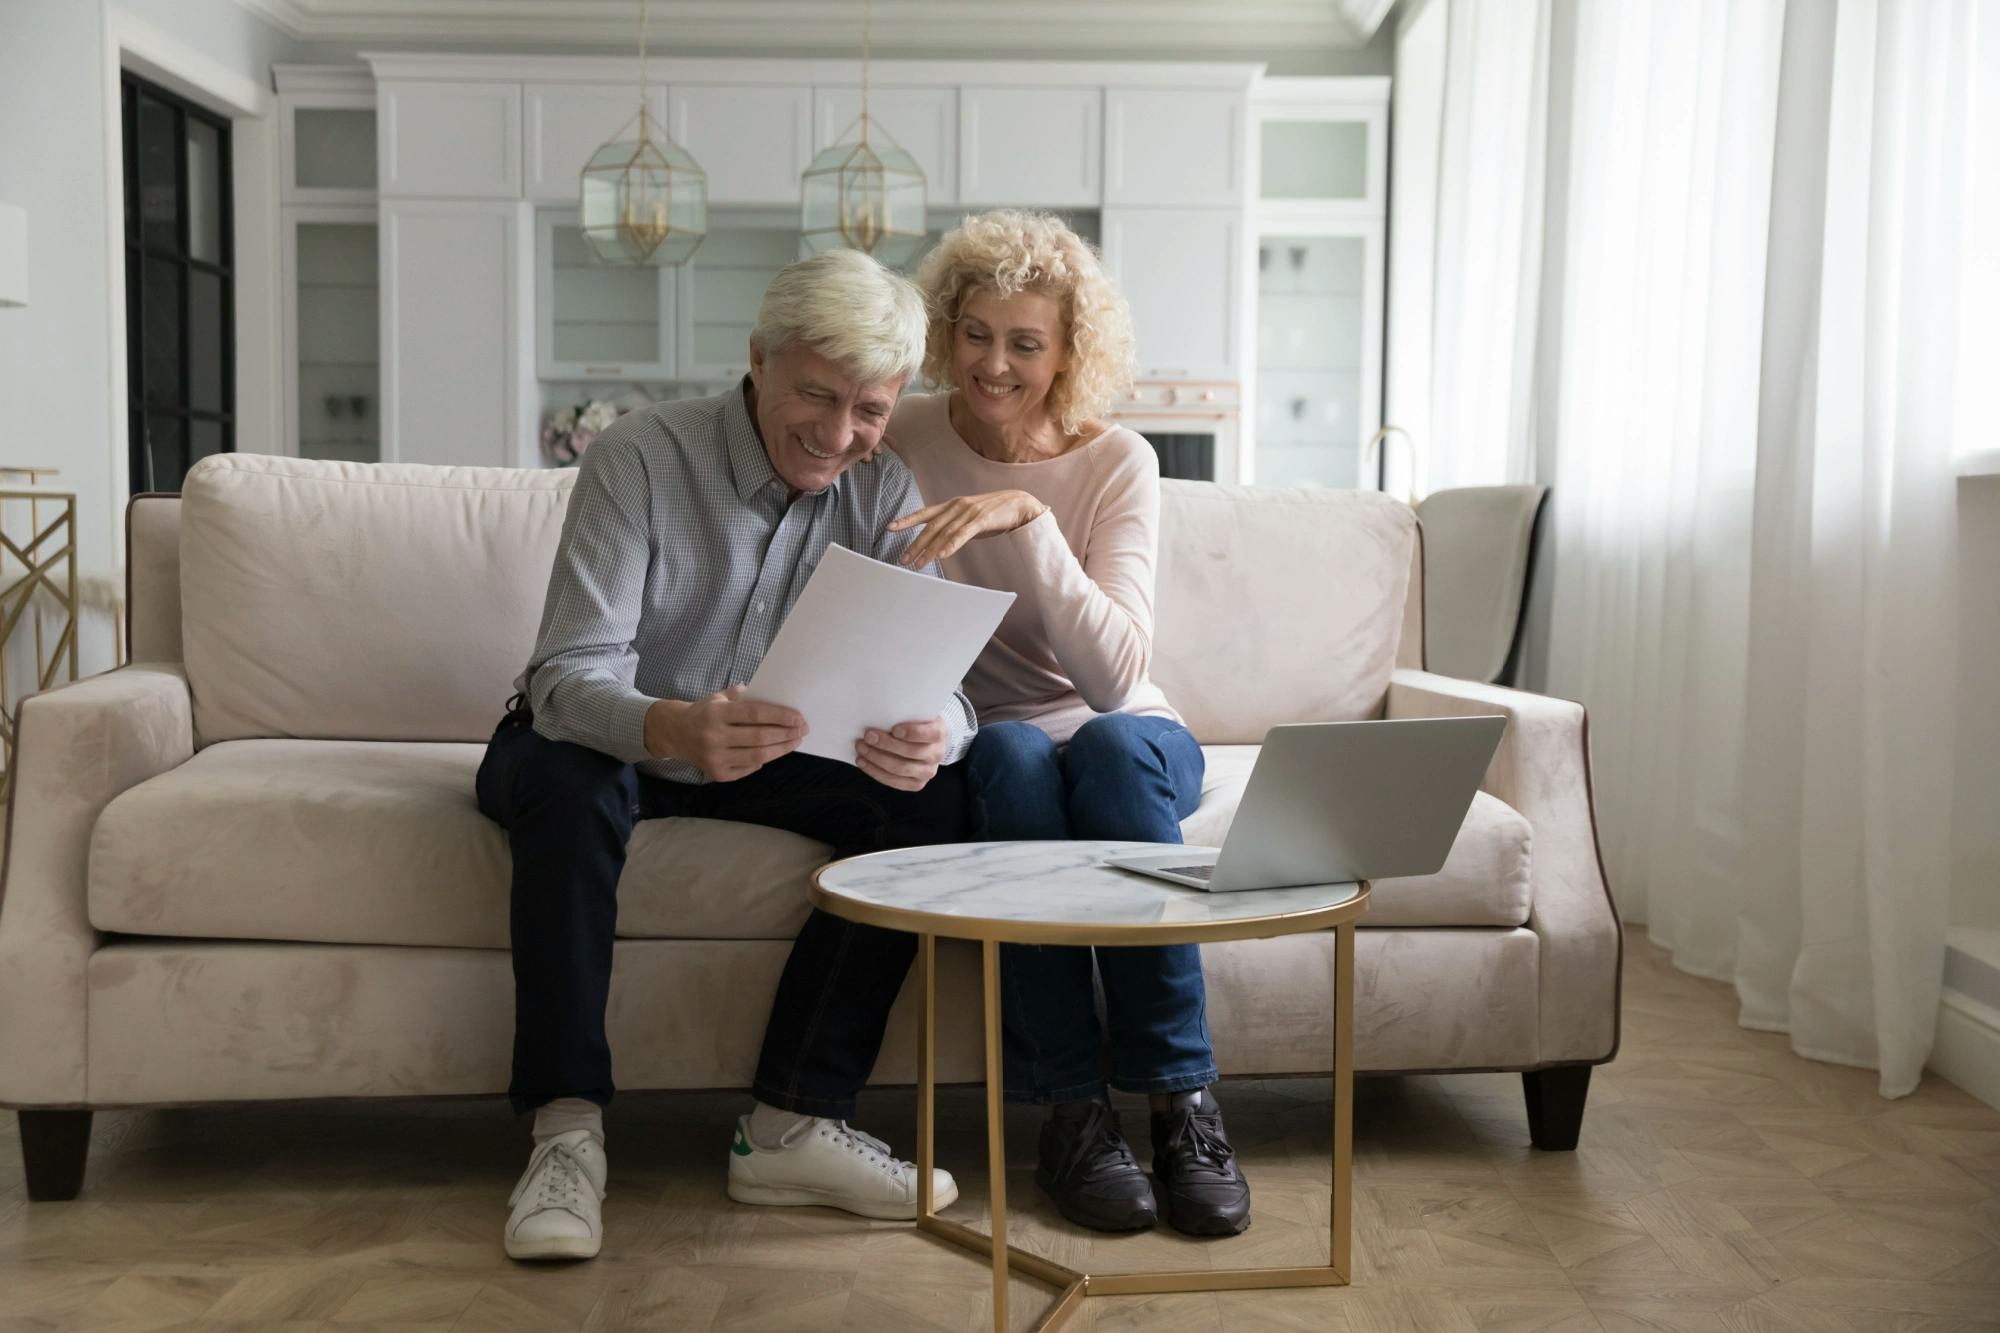 Older could reviewing their defined benefit plan on the couch